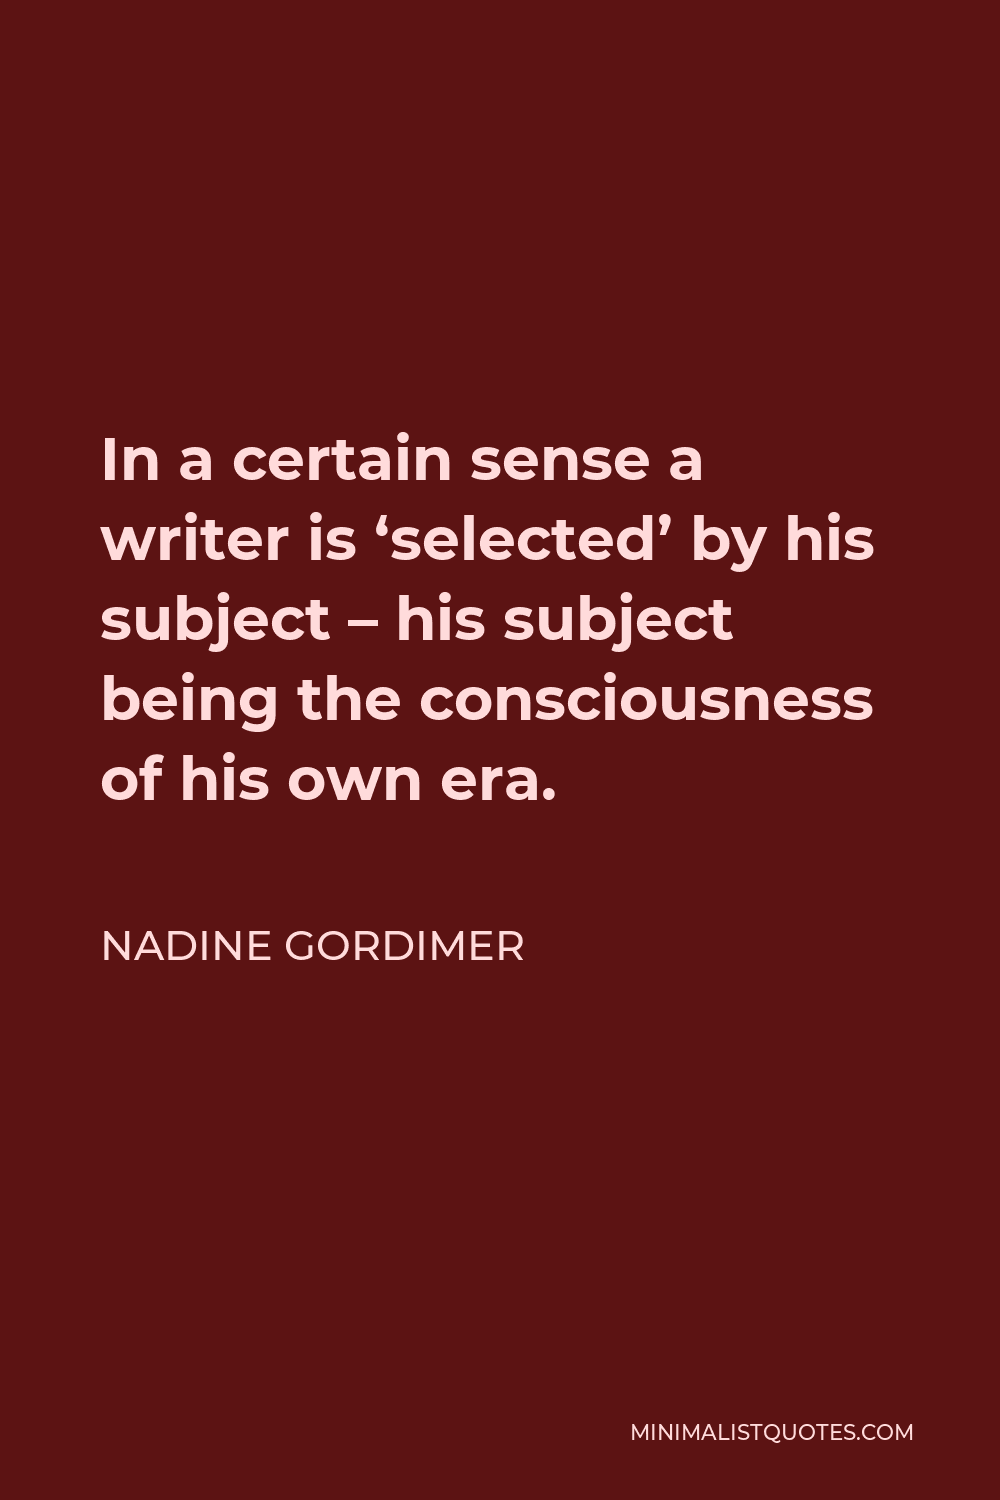 Nadine Gordimer Quote - In a certain sense a writer is ‘selected’ by his subject – his subject being the consciousness of his own era.